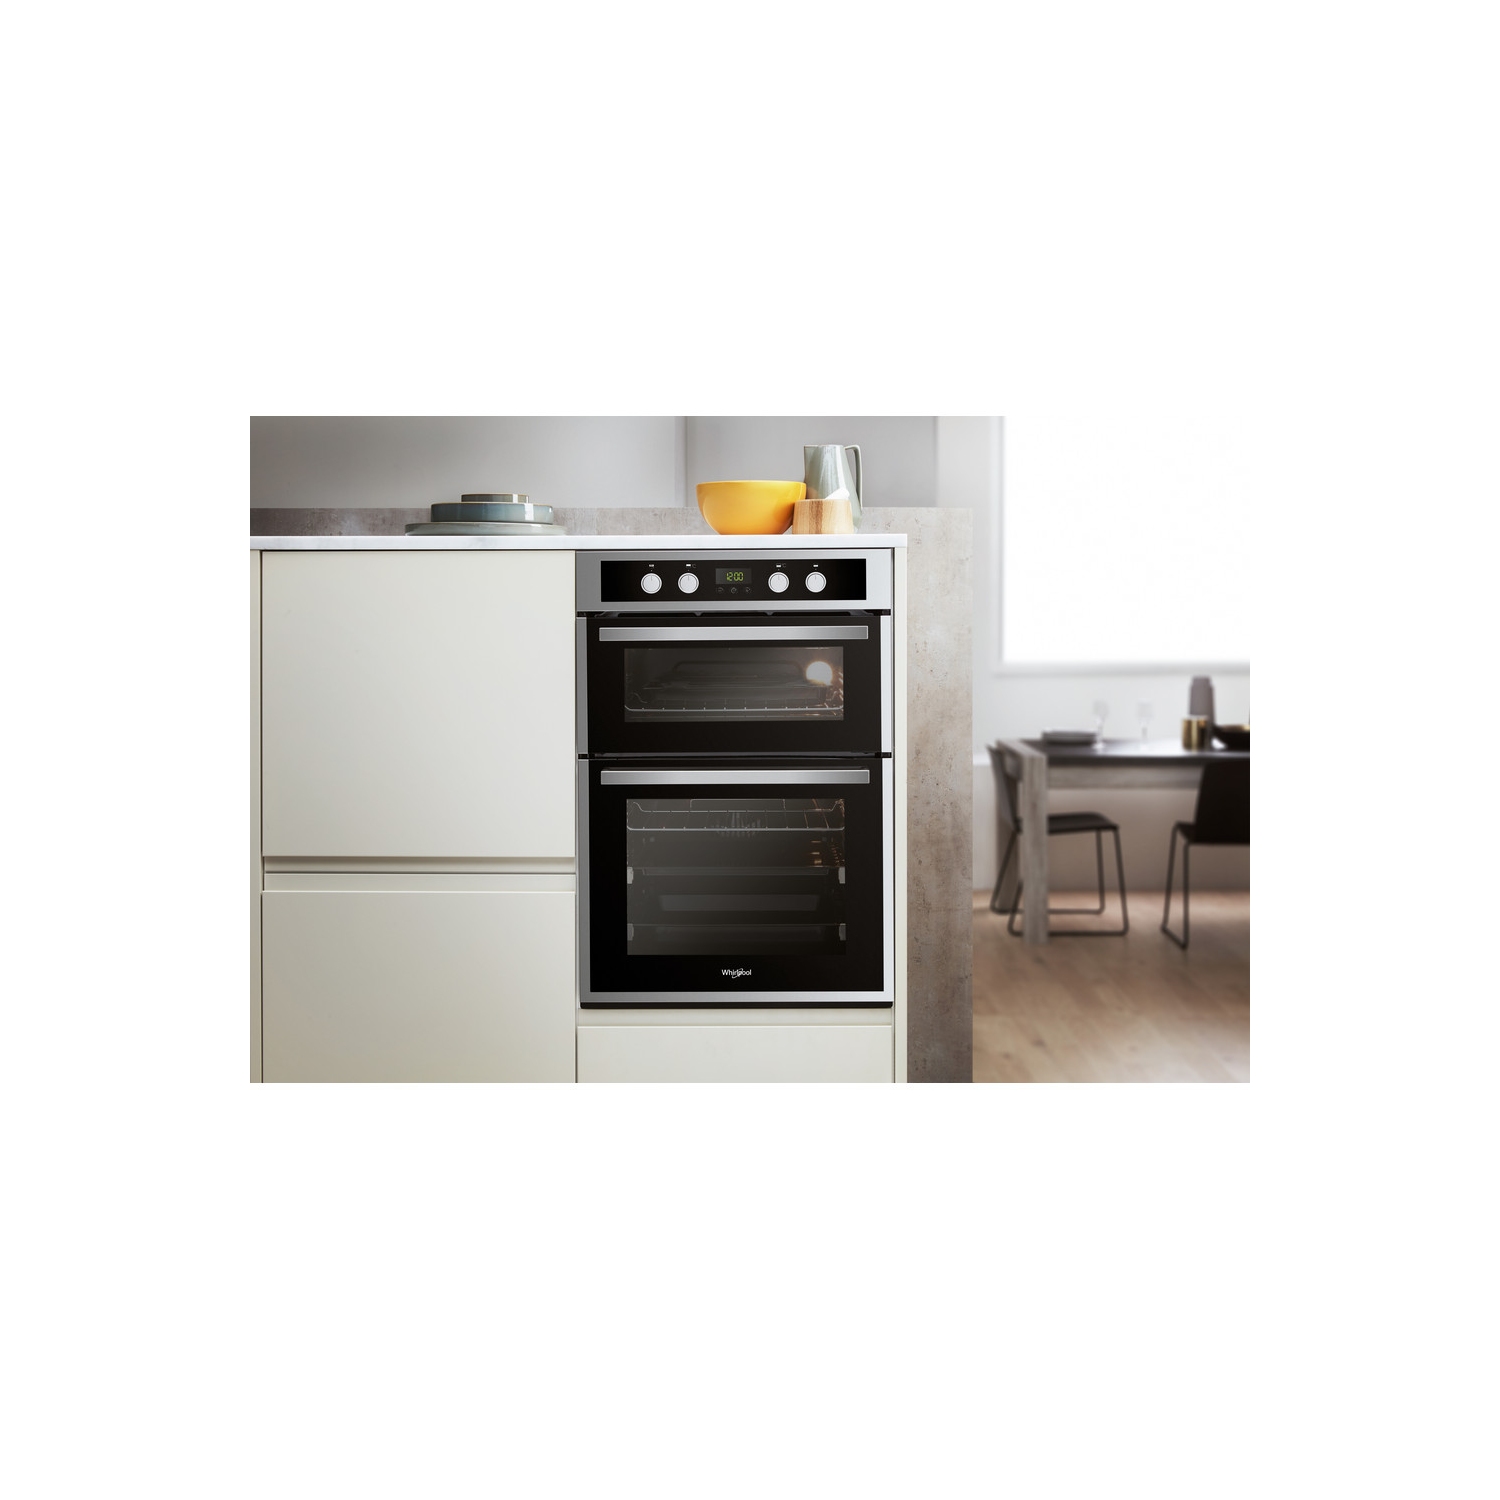 Whirlpool 60cm Built-In Electric Oven - Stainless Steel - A Rated - 4